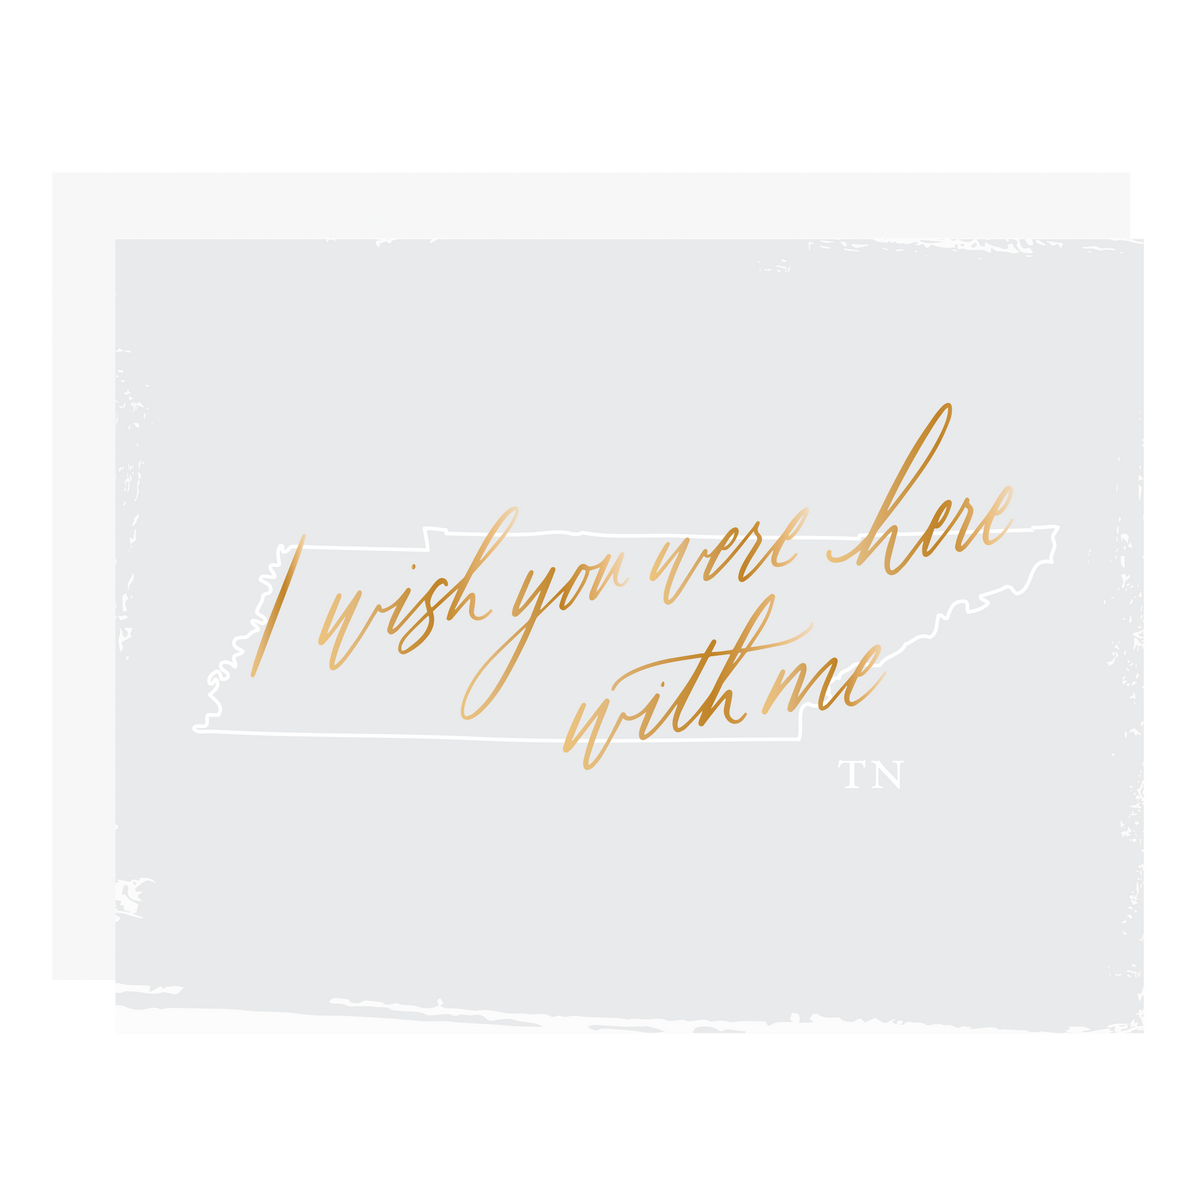 &quot;Wish You Were Here With Me - Tennessee&quot;, letterpress printed by hand with gold foil. 